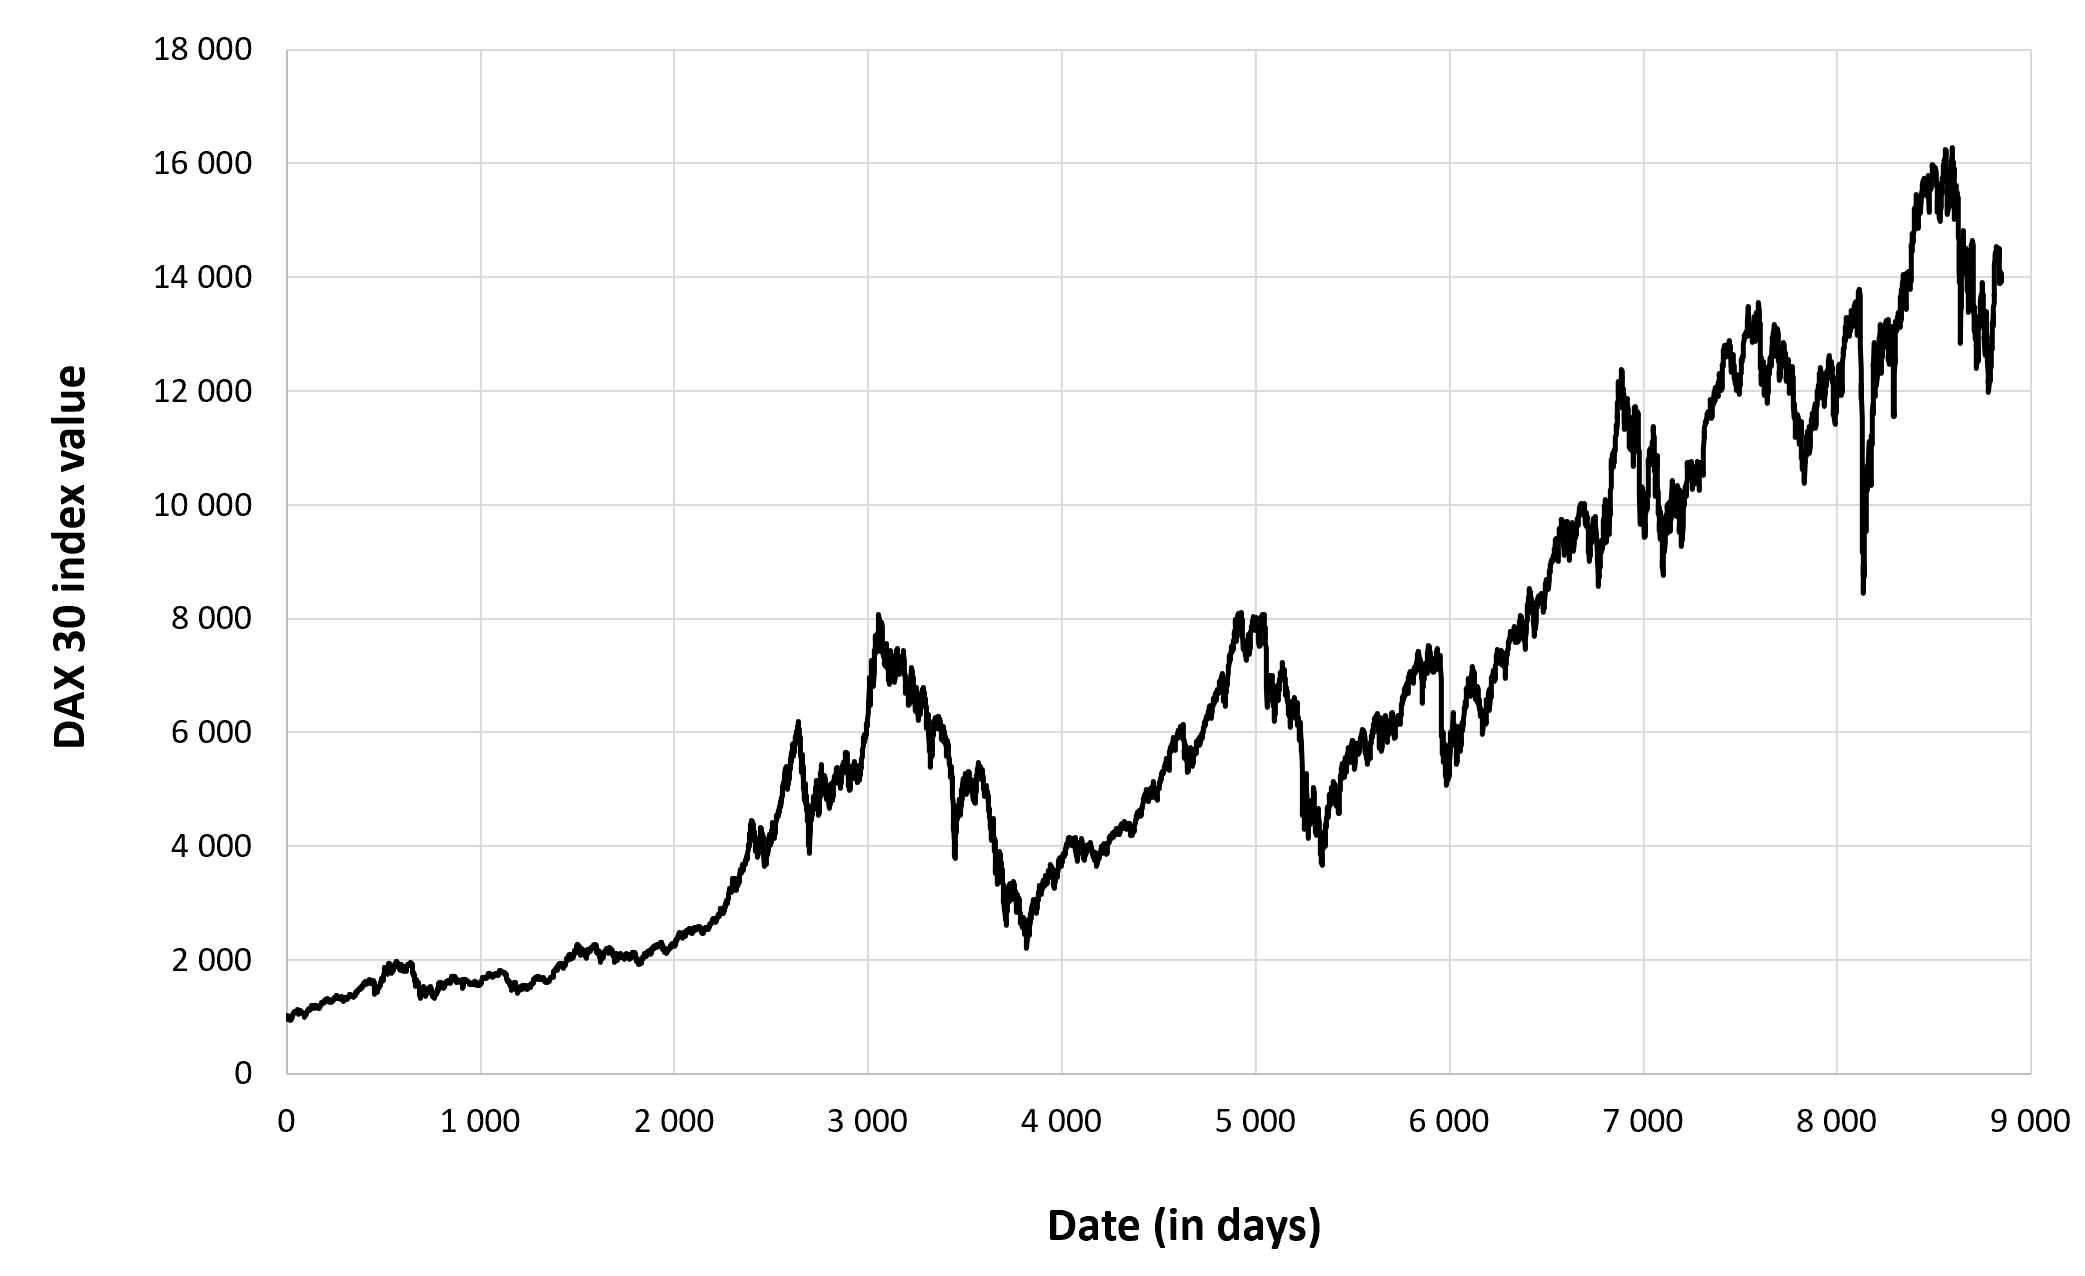 Evolution of the DAX 30 index